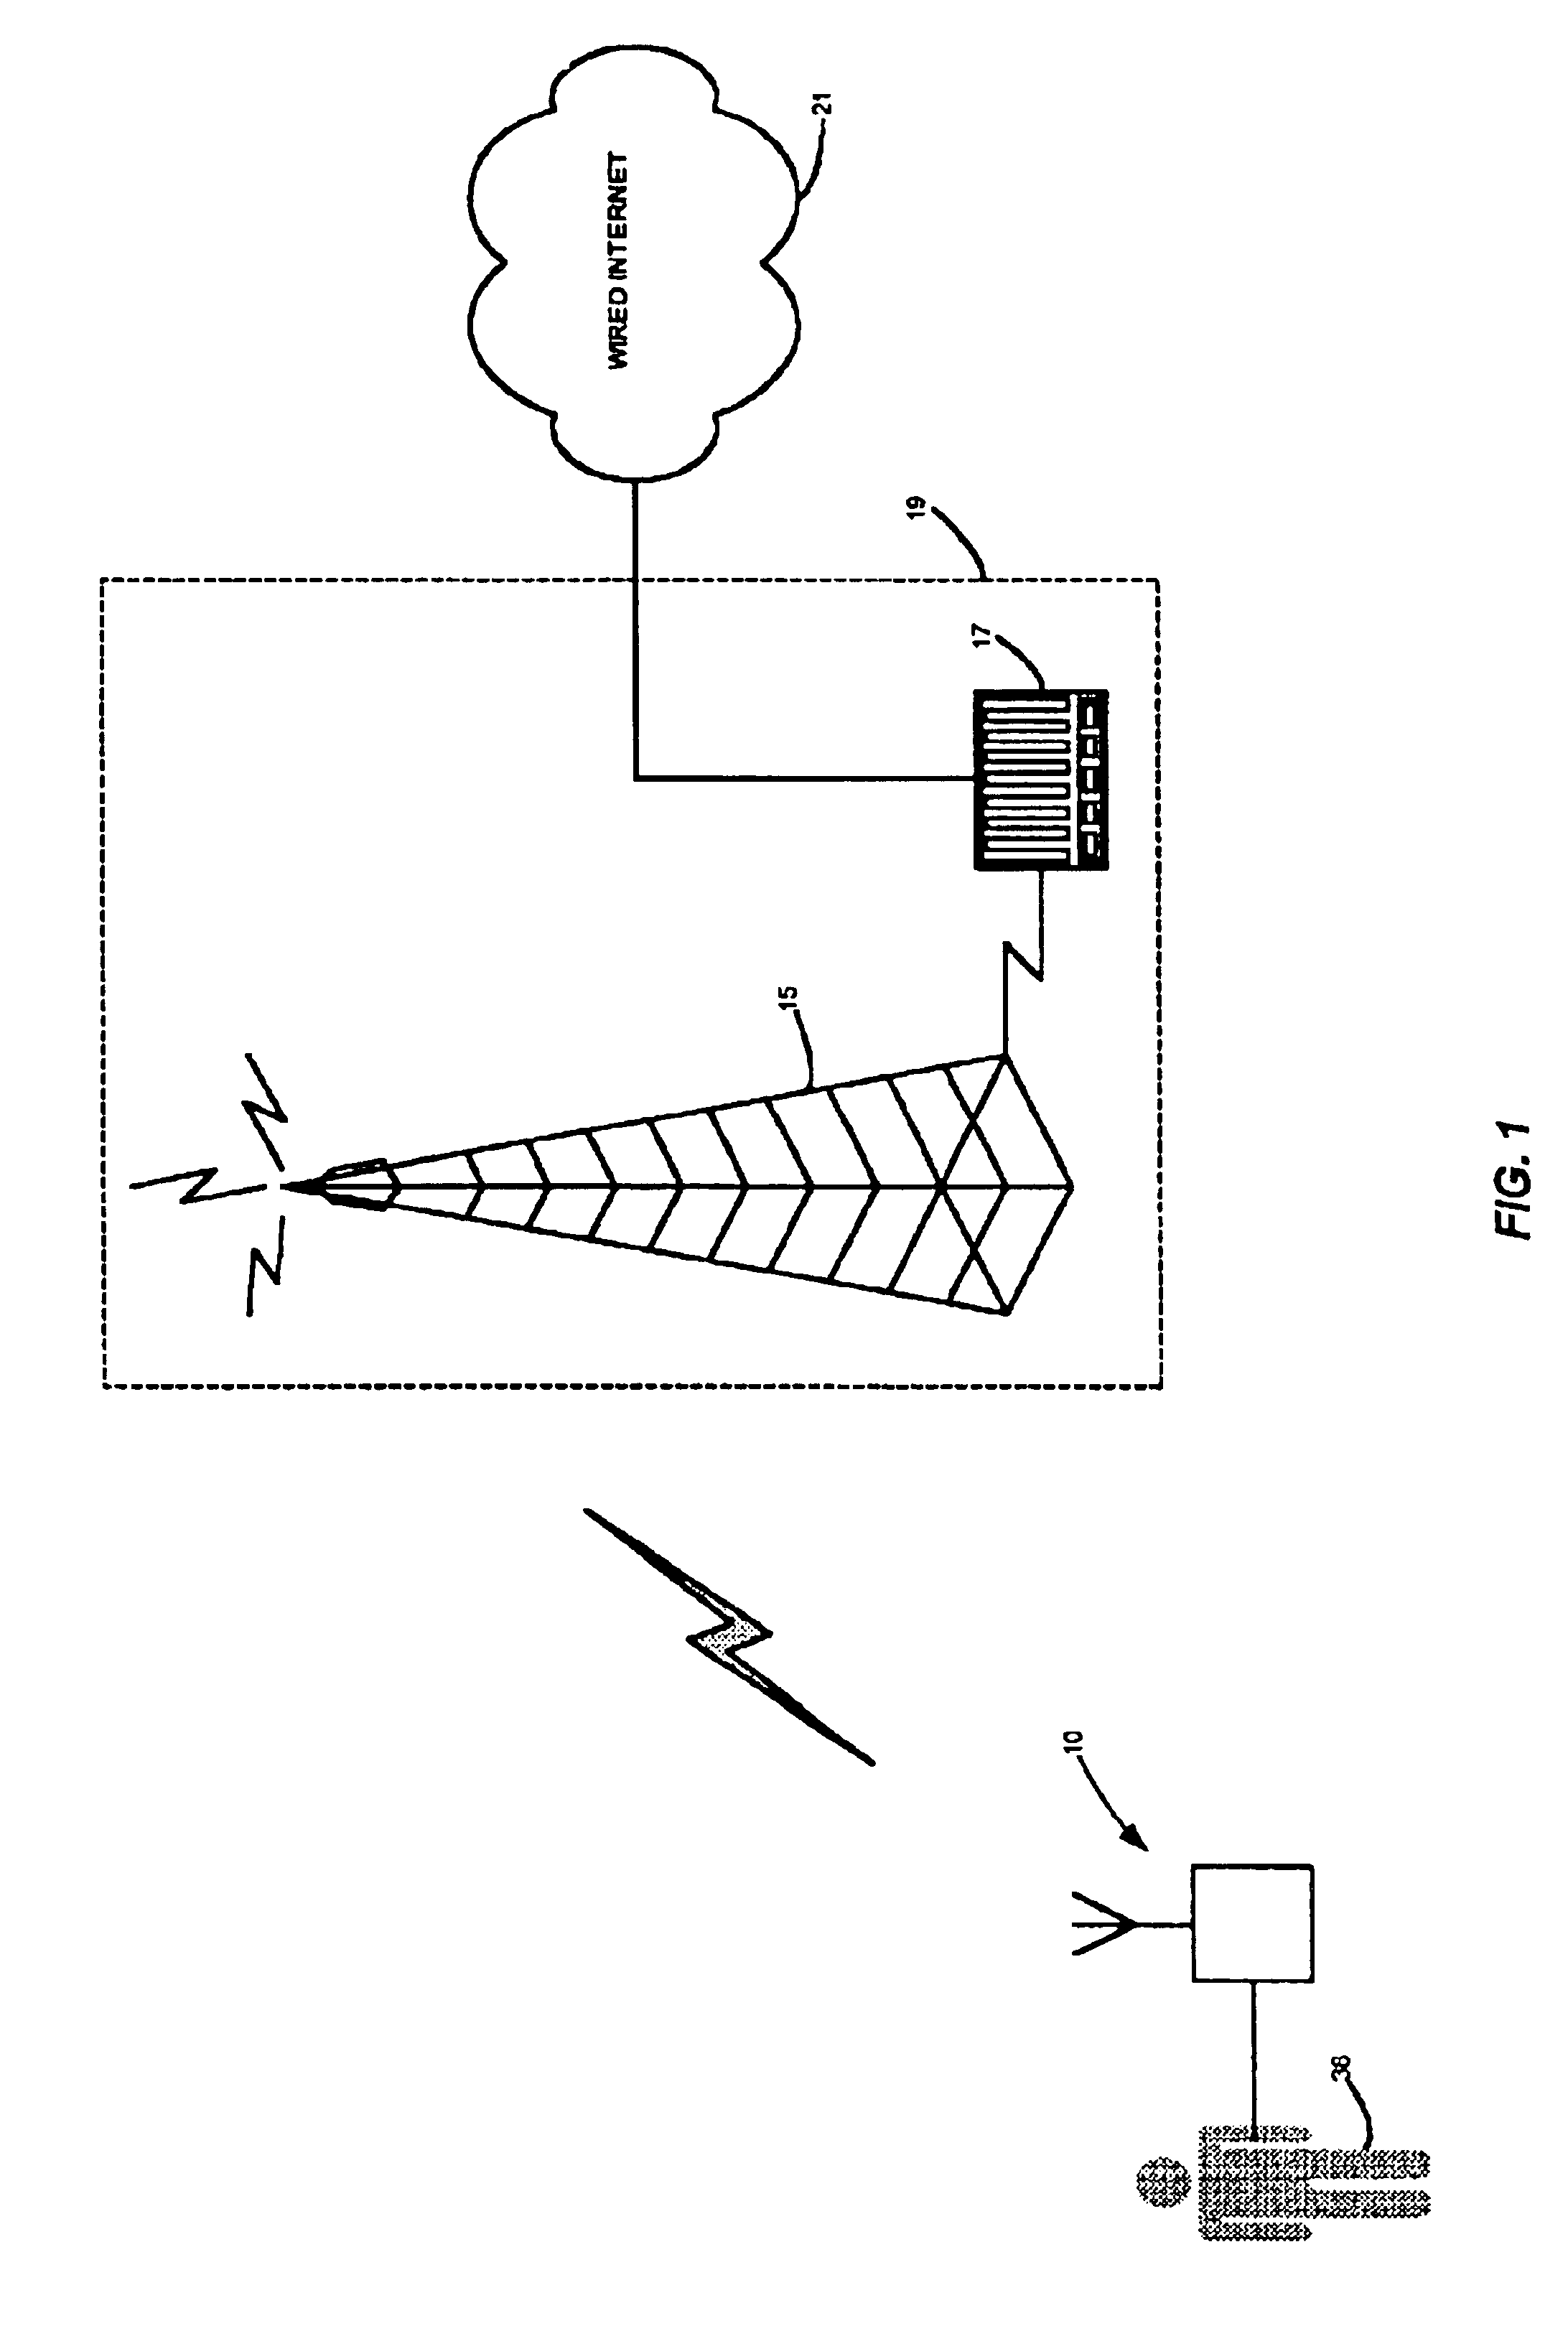 Method and apparatus for health and disease management combining patient data monitoring with wireless internet connectivity